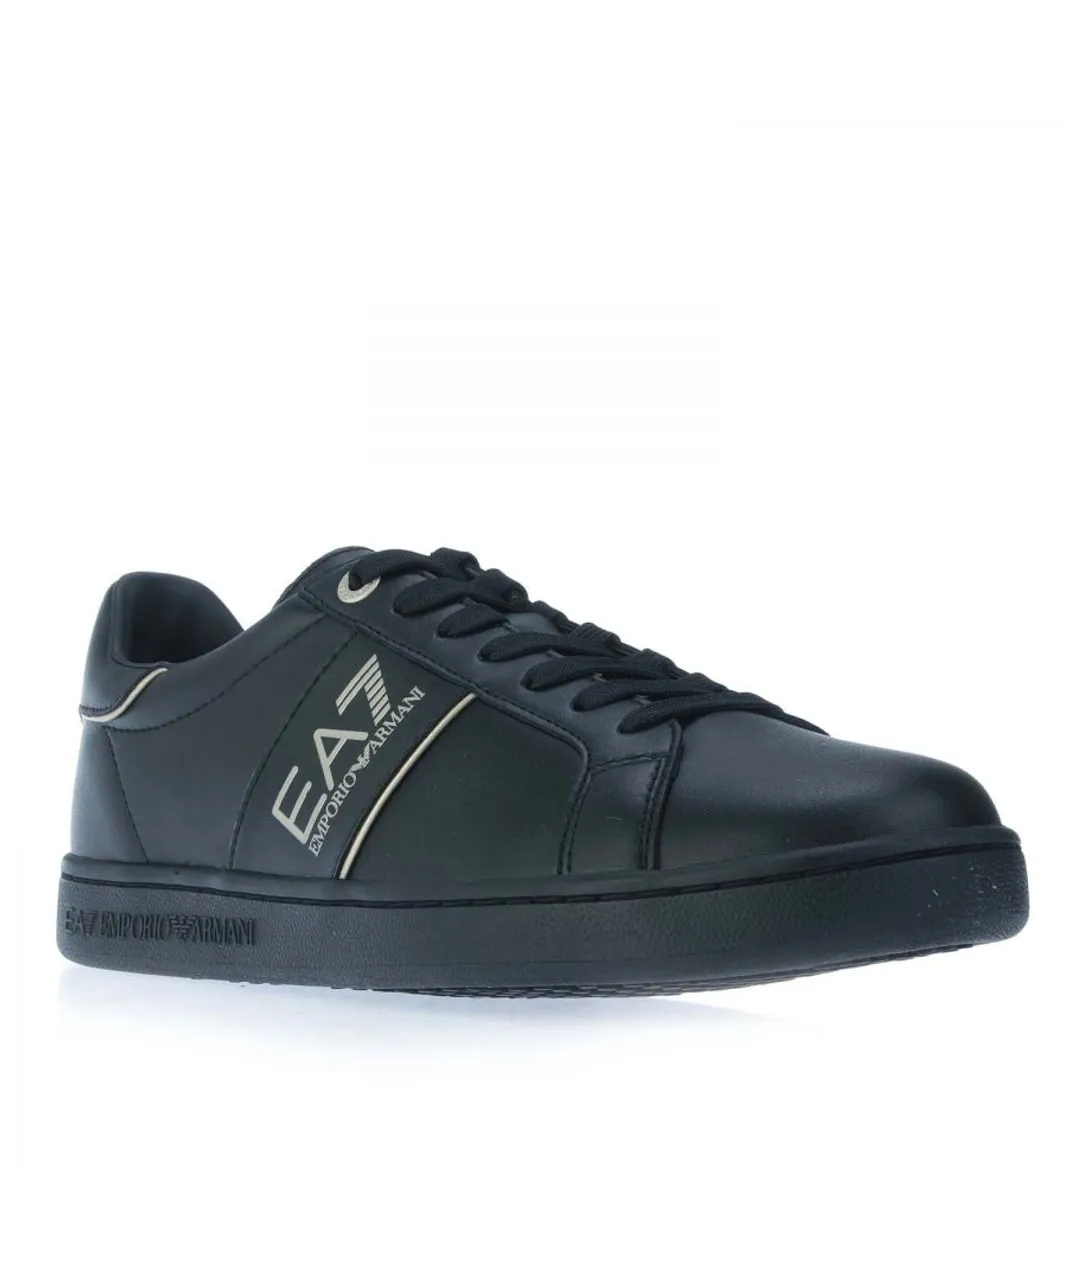 EA7 Mens Emporio Armani Leather Sports Shoes in Black Leather (archived)